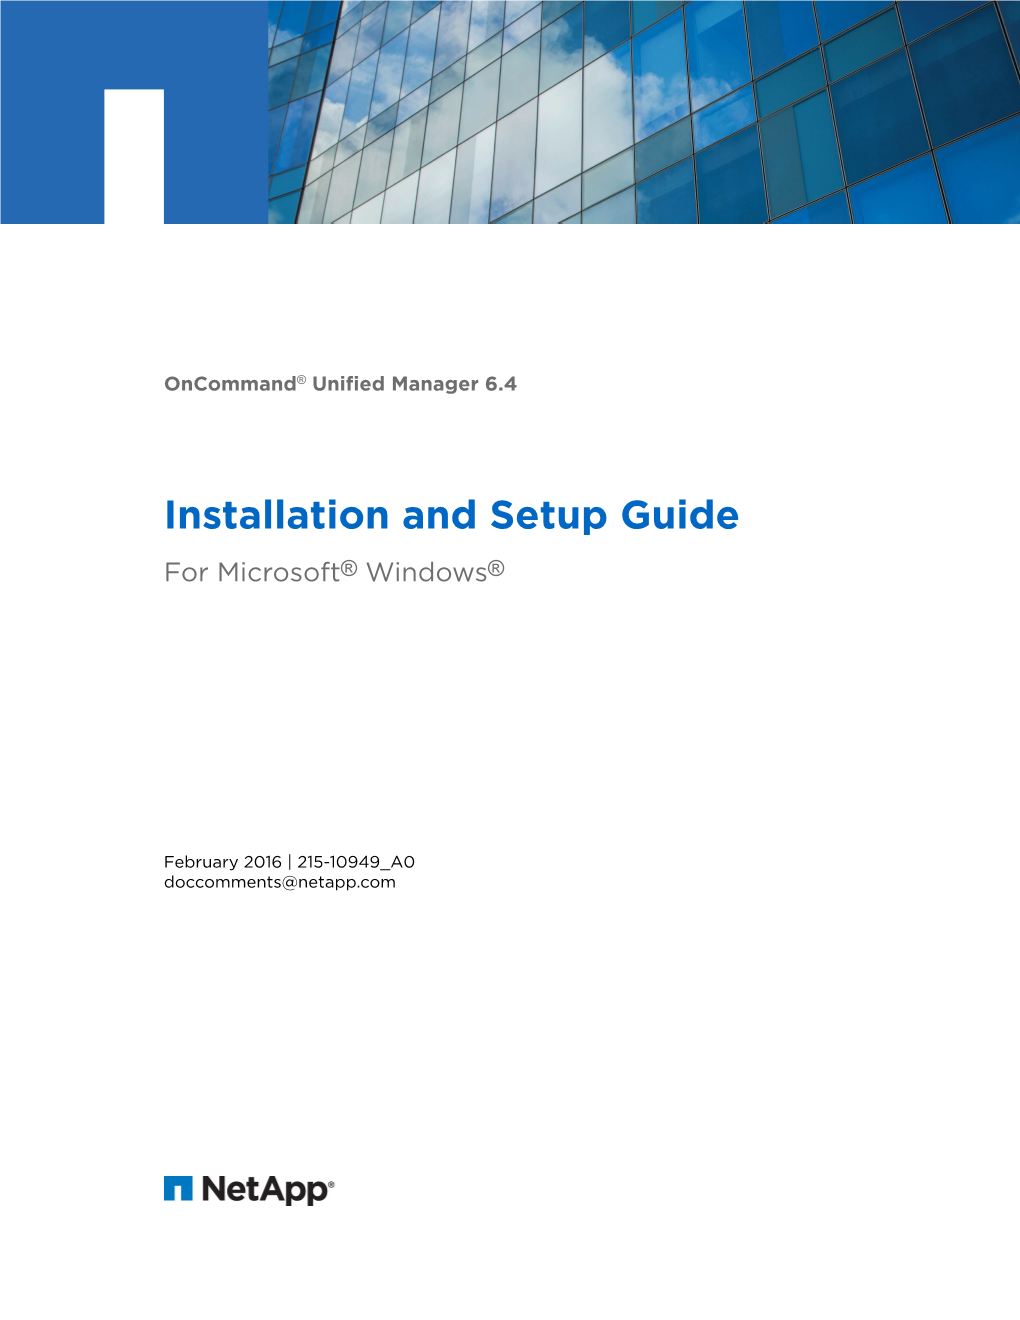 Oncommand Unified Manager 6.4 Installation and Setup Guide for Microsoft® Windows